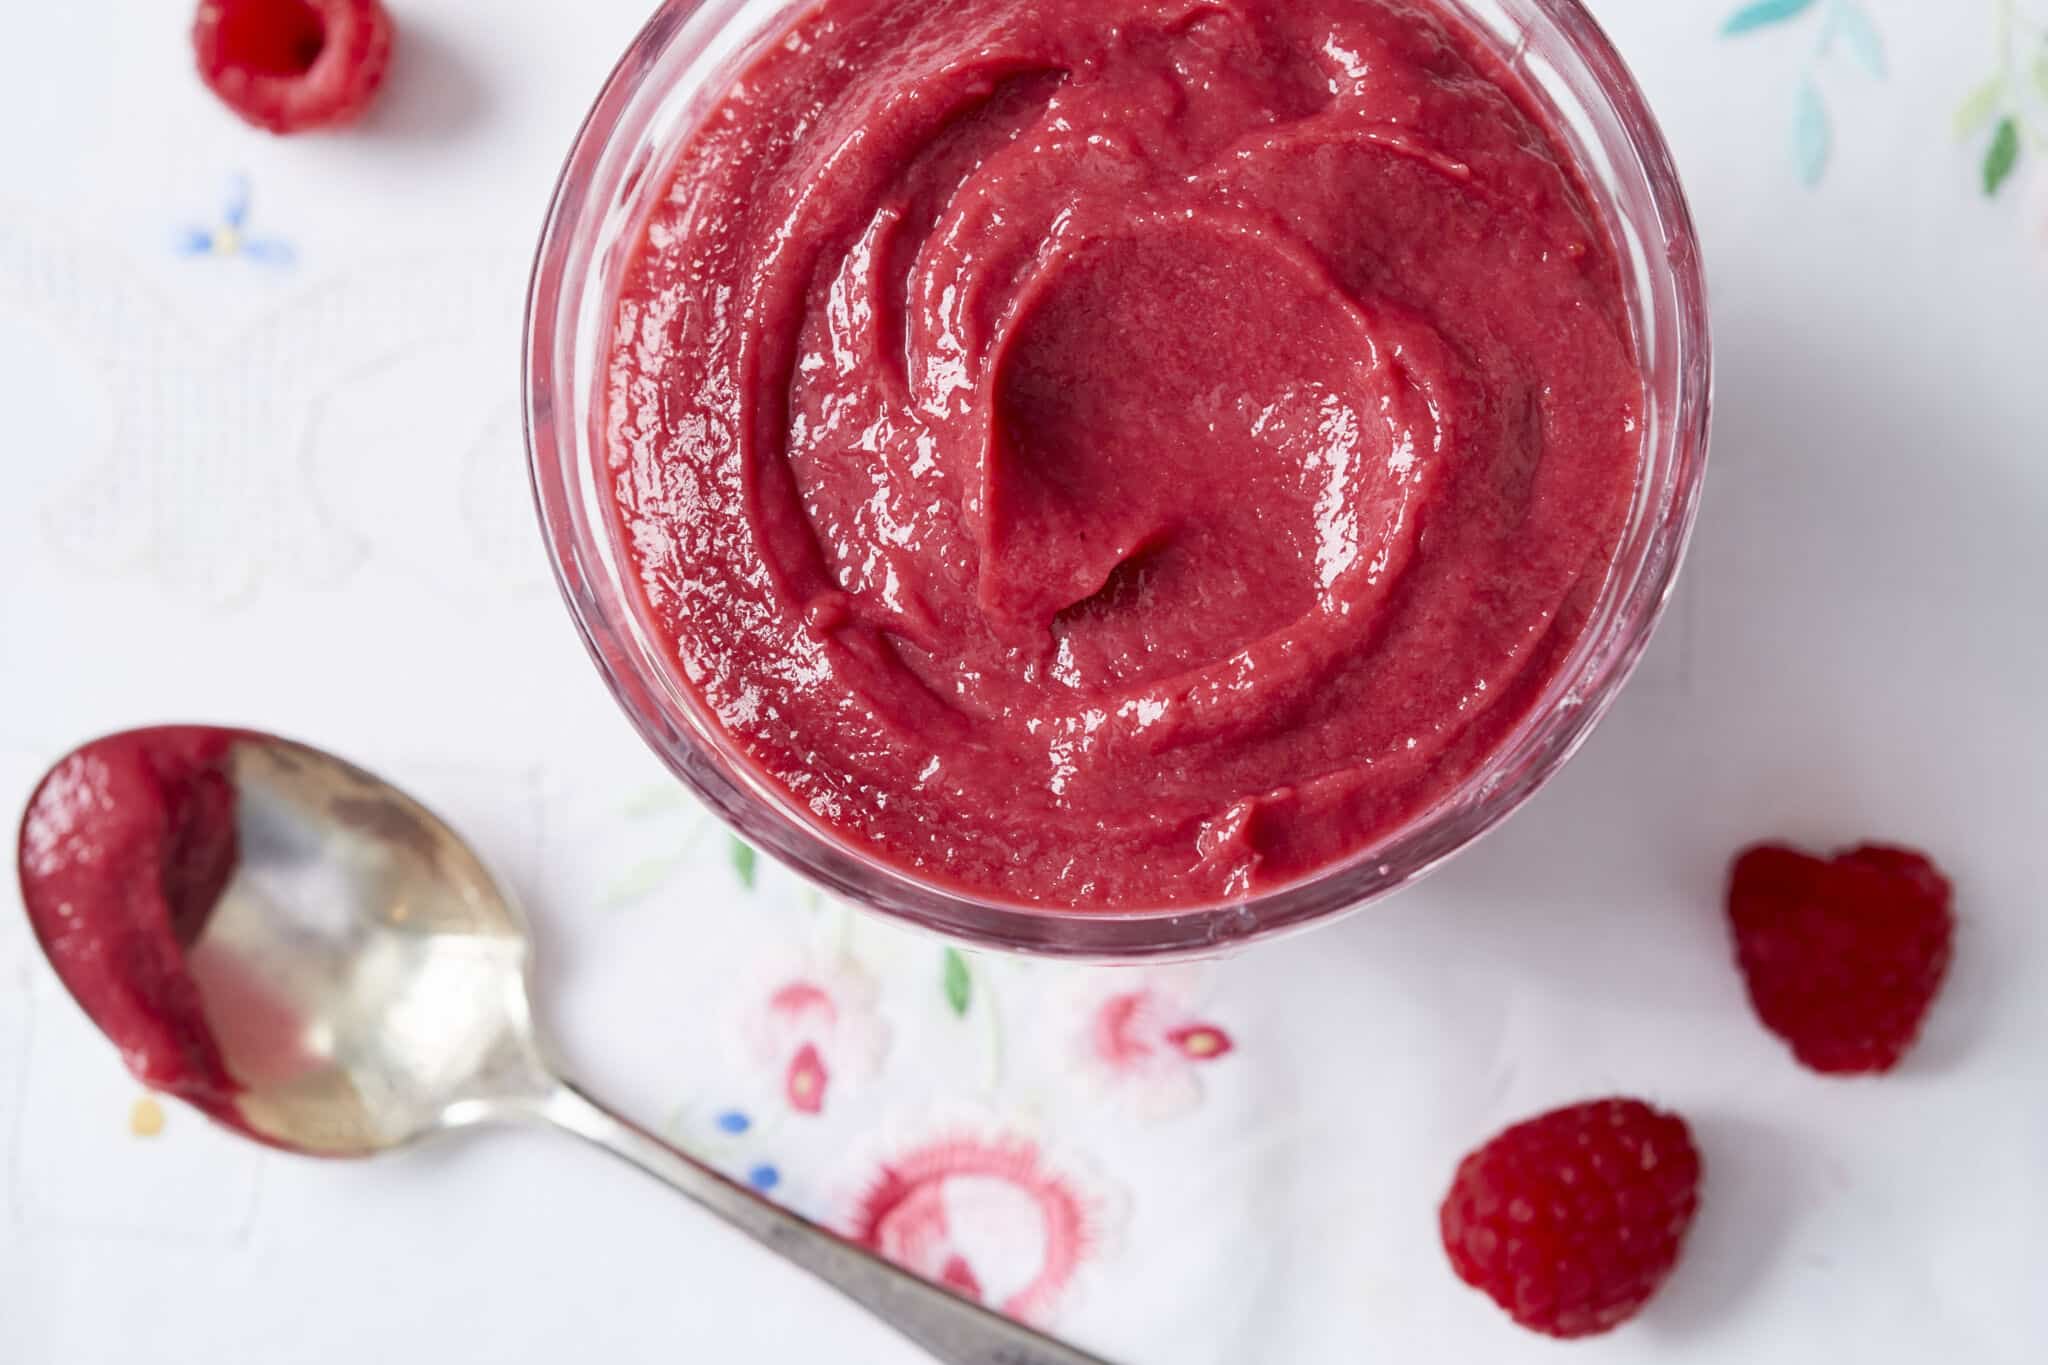 An overhead shot of a glass bowl of stunning and luscious raspberry curd in vibrant red color and super creamy texture. A spoon and three fresh raspberries are on the white linen with embroidered flowers outside the bowl.